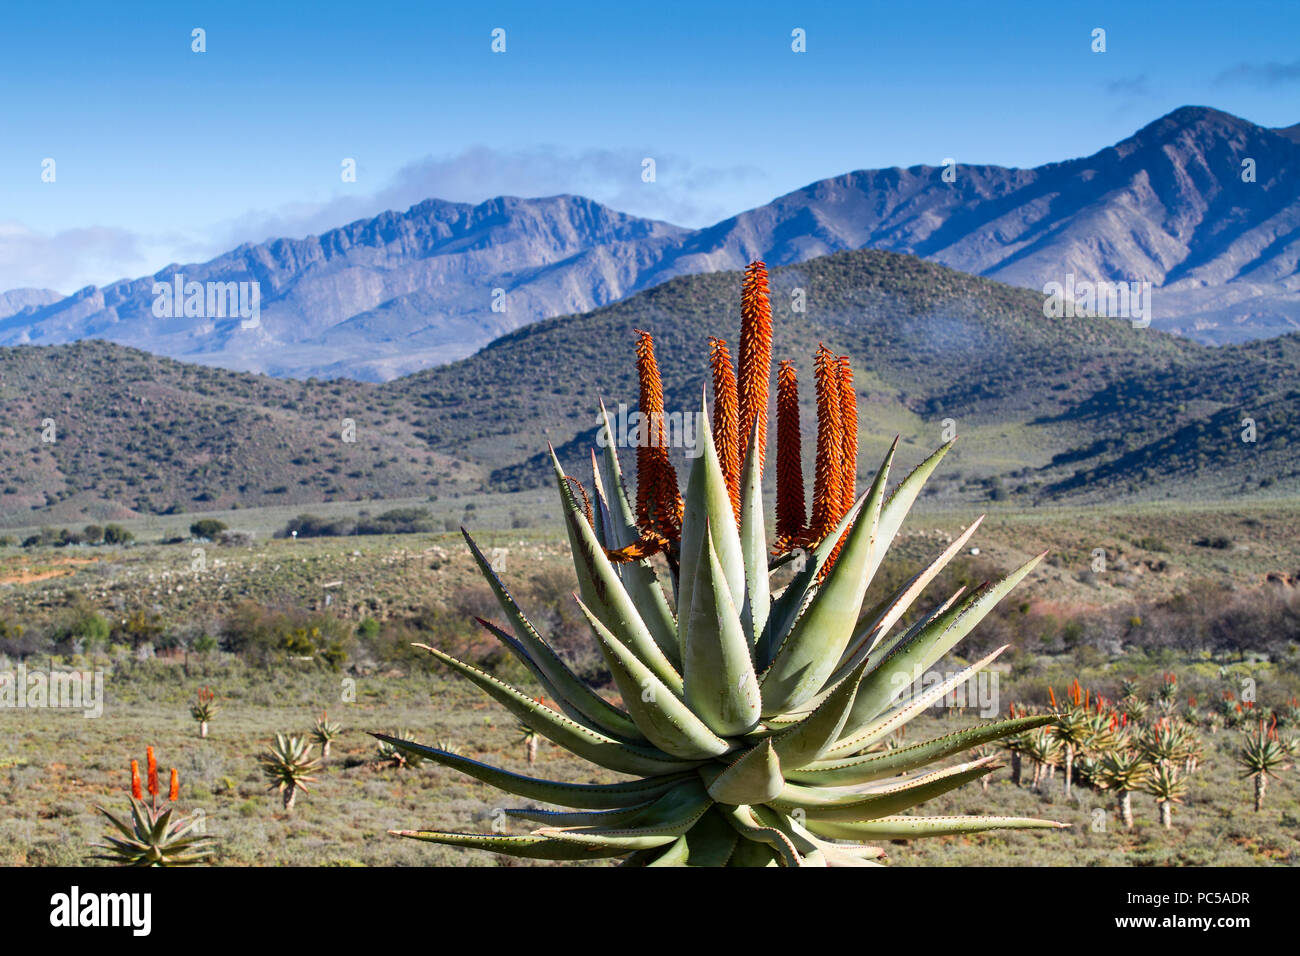 Flowering Aloe fields with mountains Stock Photo